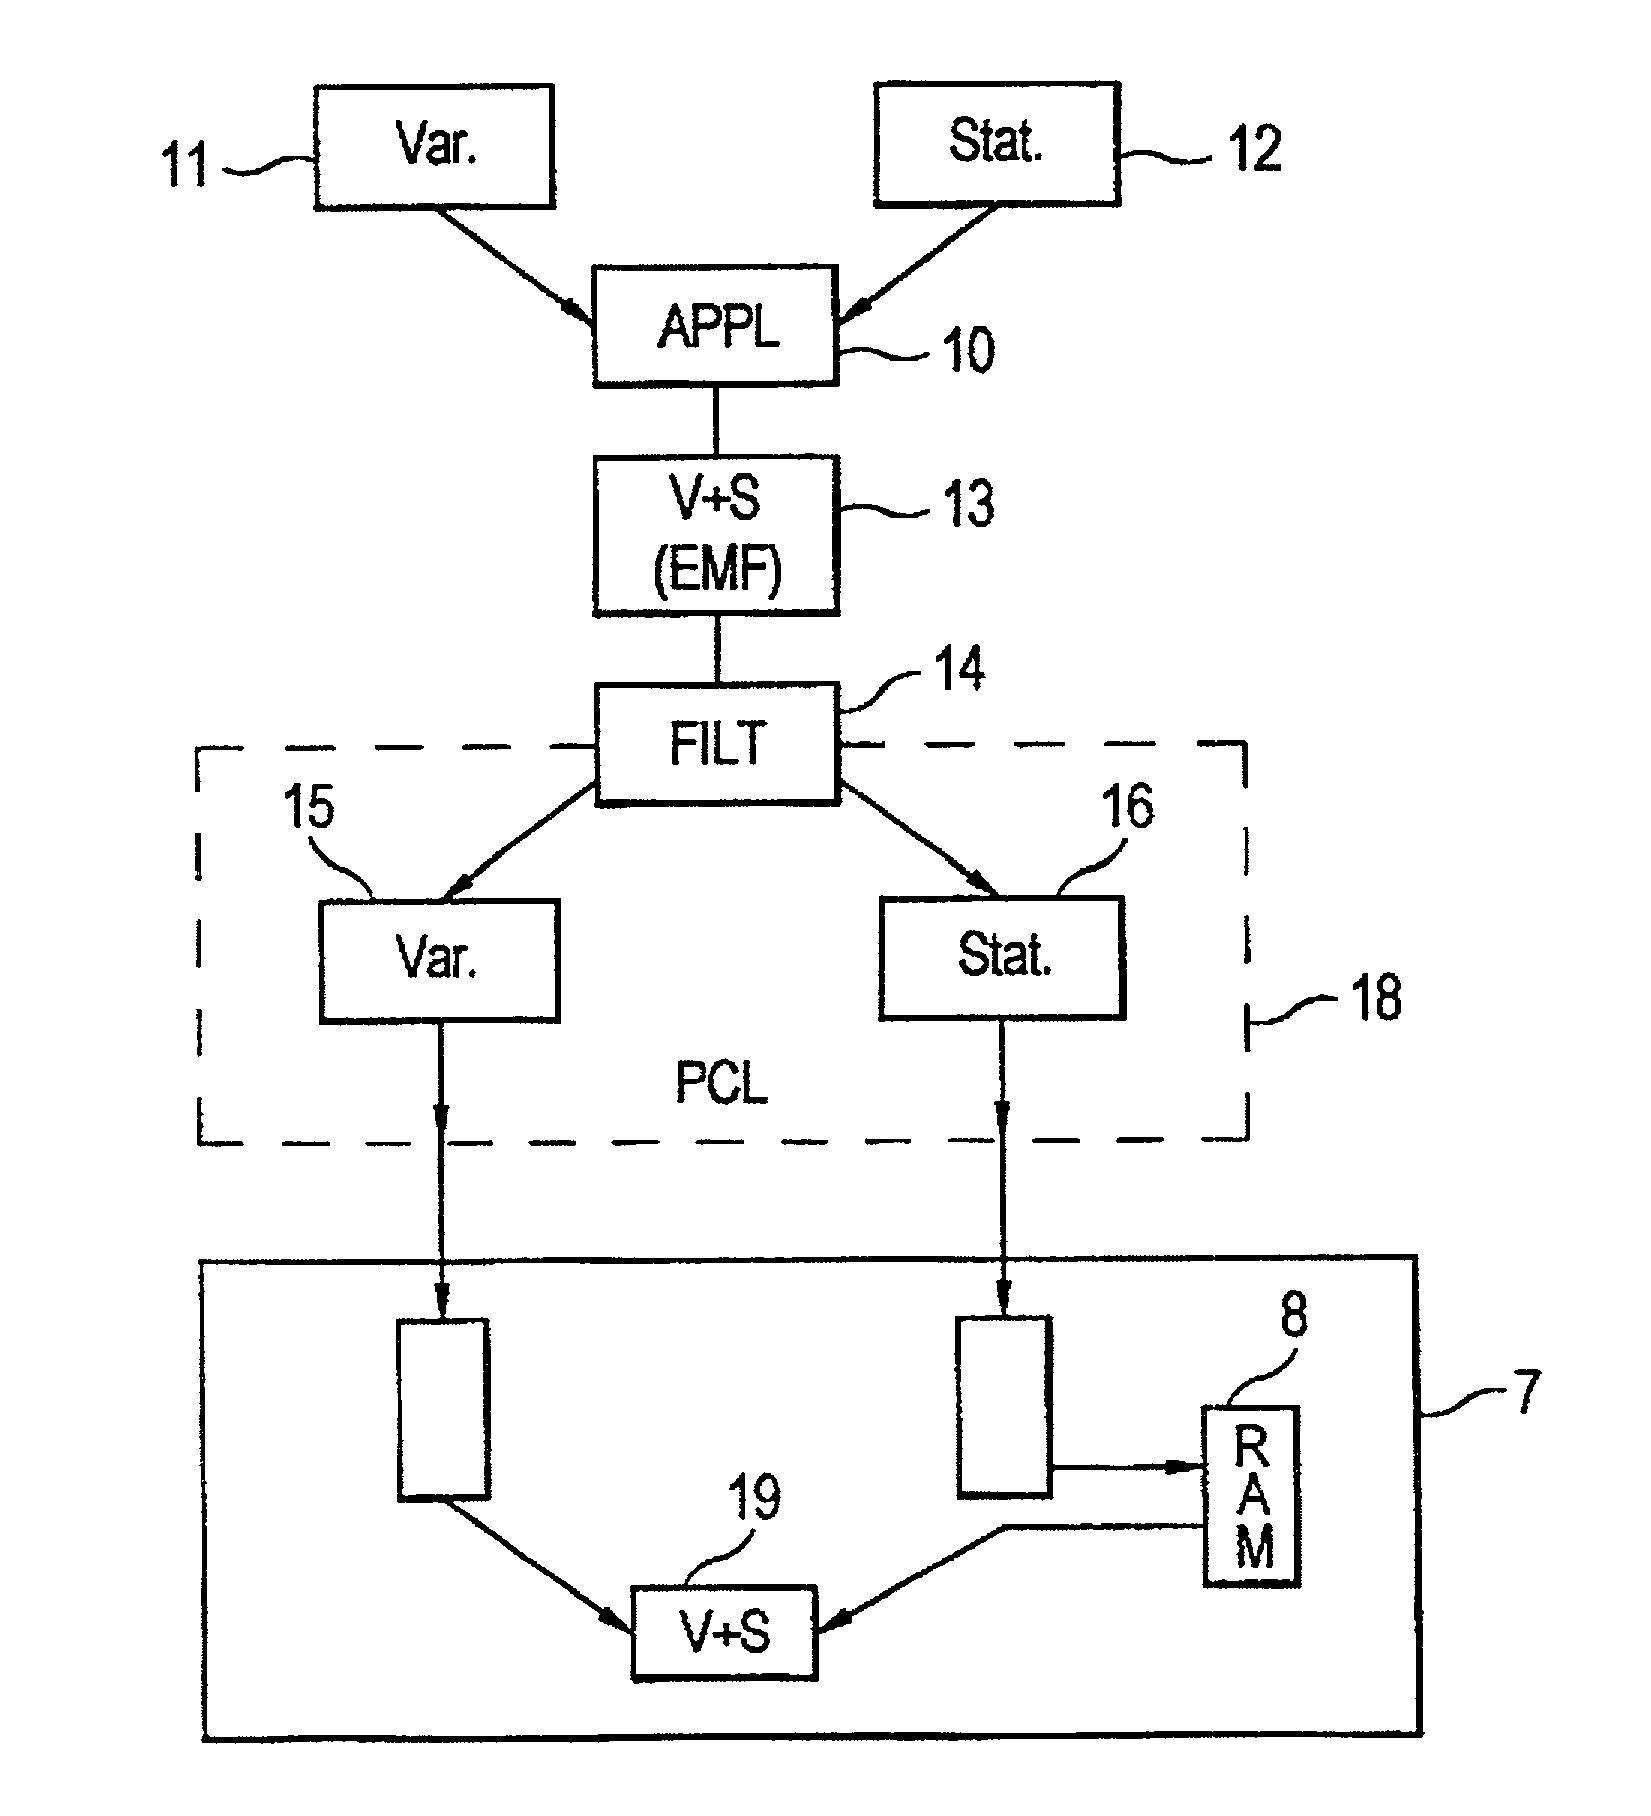 Method, computer program product and system for the transmission of computer data to an output device